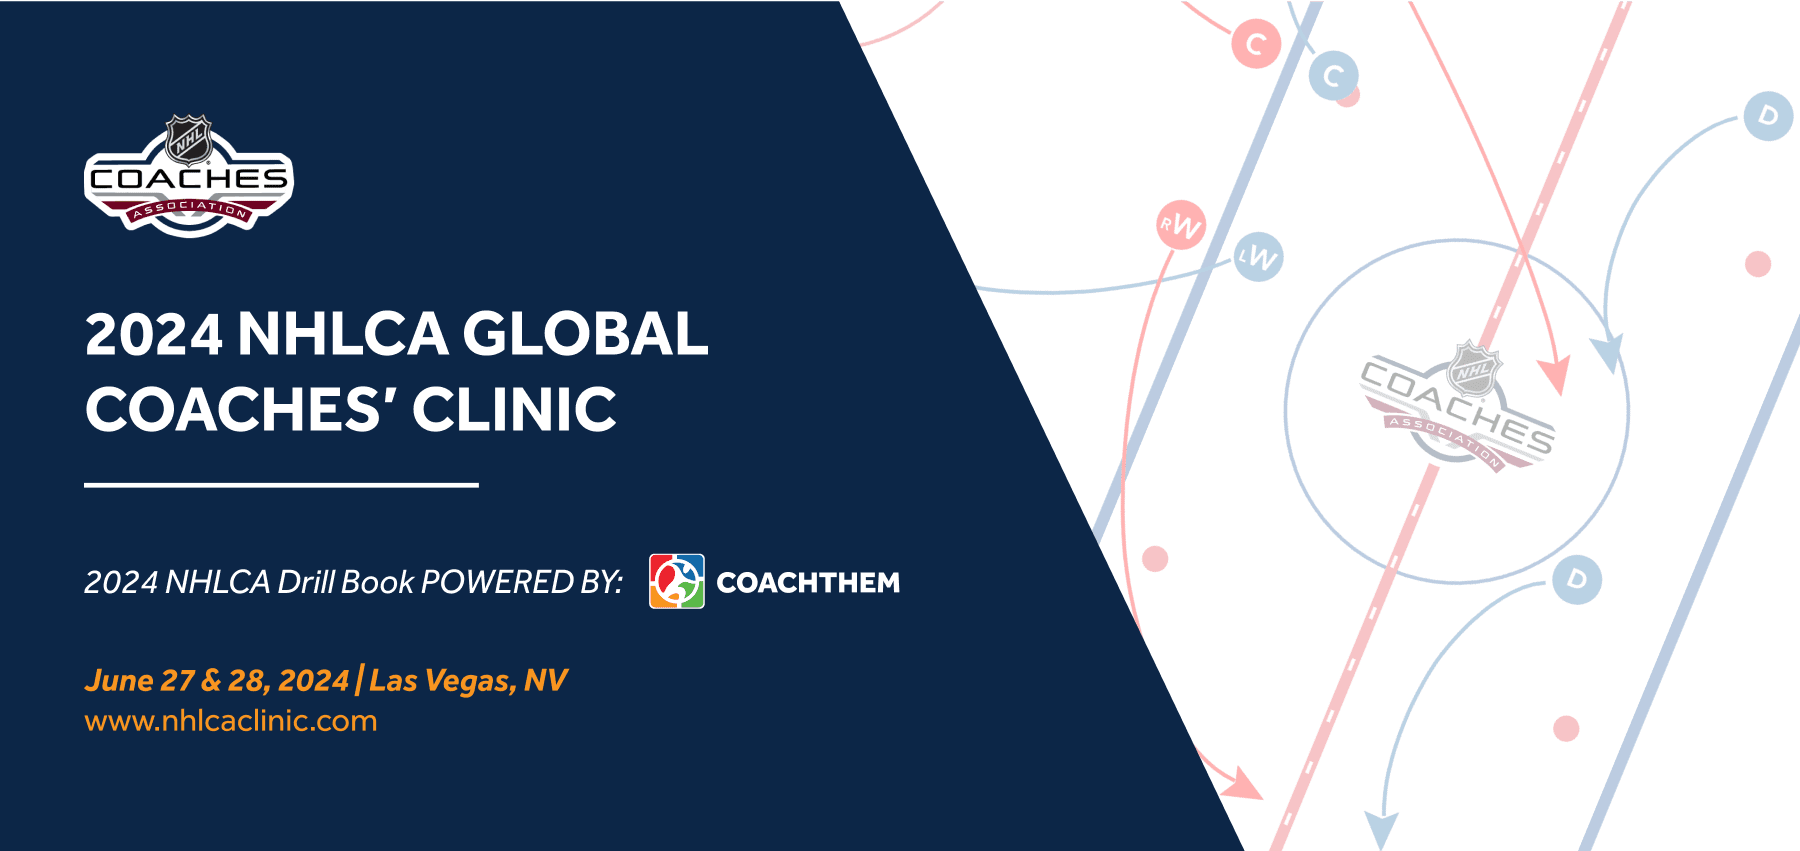 CoachThem Returns to the 2024 NHLCA Global Coaches’ Clinic